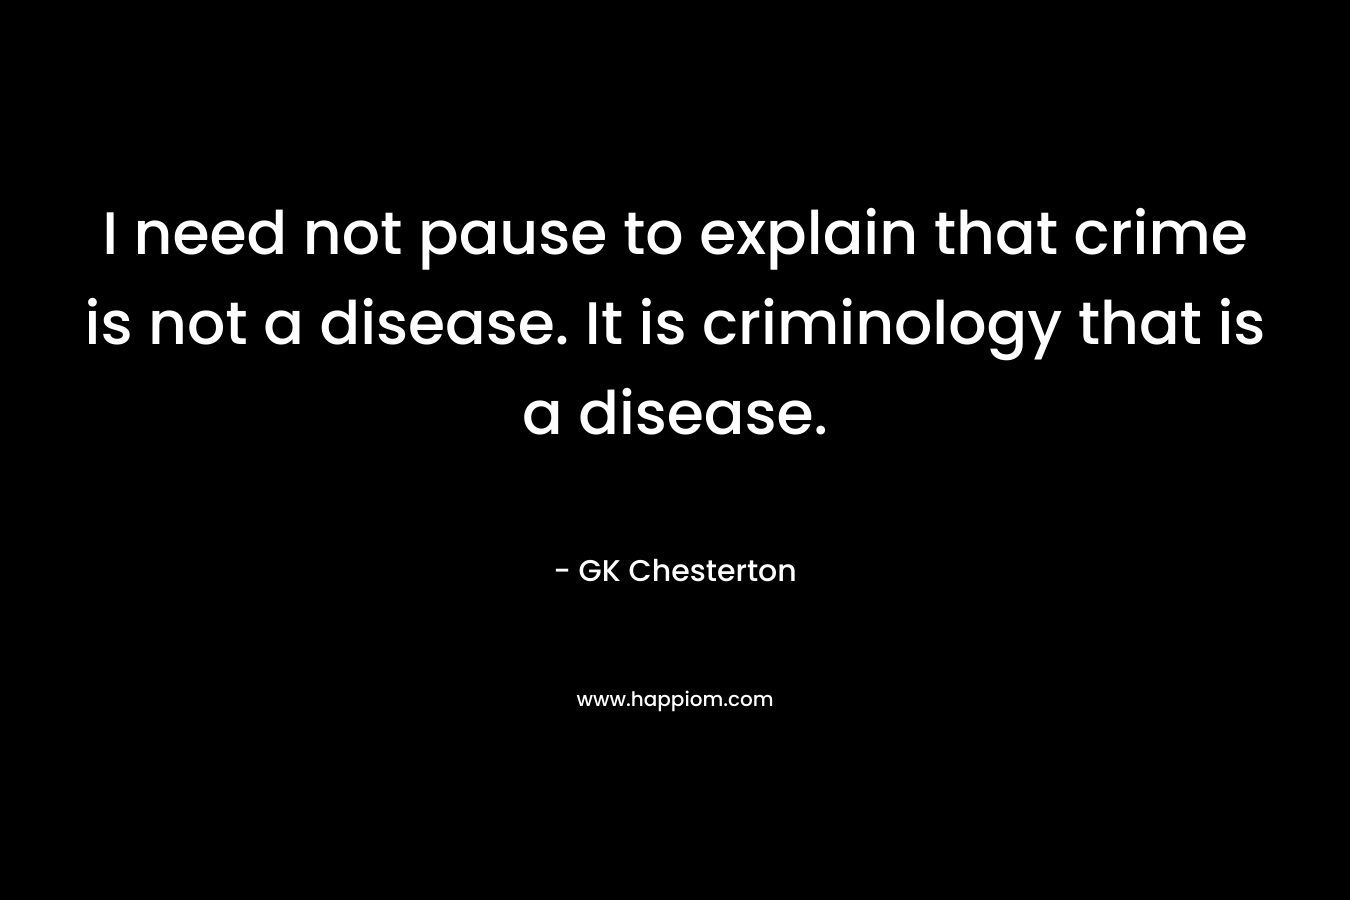 I need not pause to explain that crime is not a disease. It is criminology that is a disease.